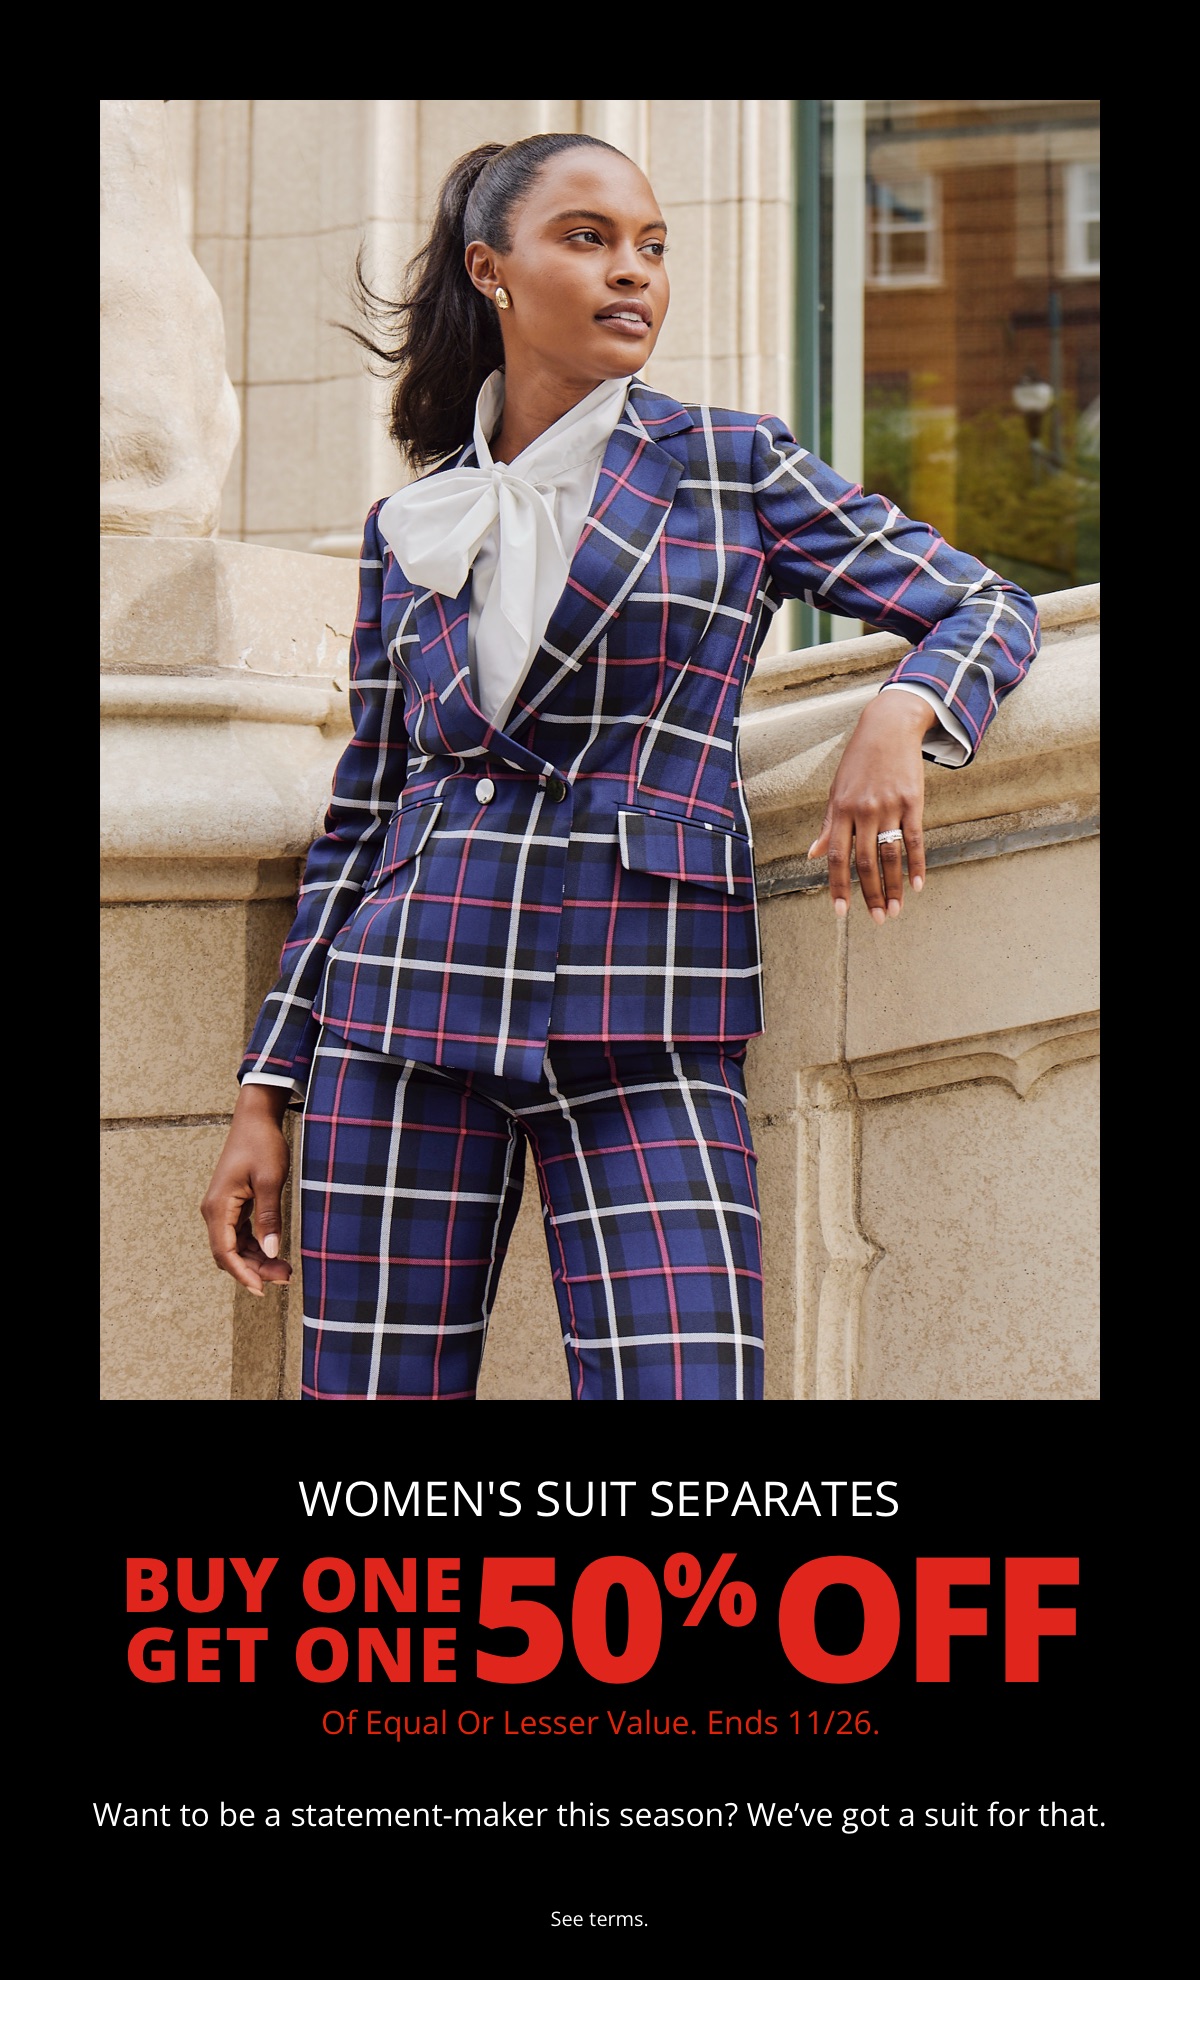 Womens Suit Separates|Buy One Get One 50% Off|Of Equal or Lesser Value. Ends 11/26.|Want to be a statement-maker this season? Weve got a suit for that.|See terms.